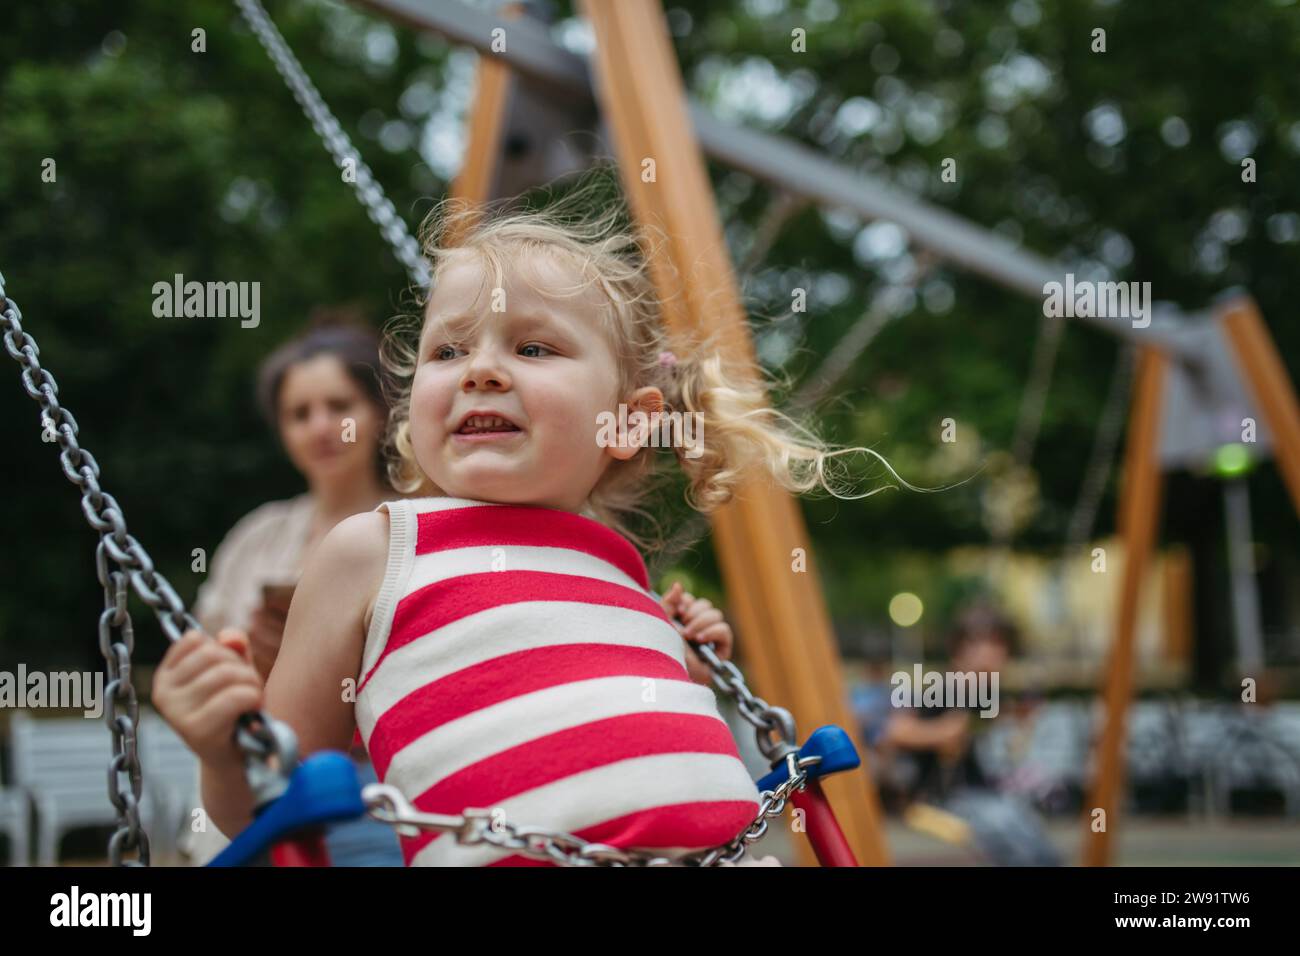 Little toddler girl and mother have fun at playground swinging on a swing Stock Photo